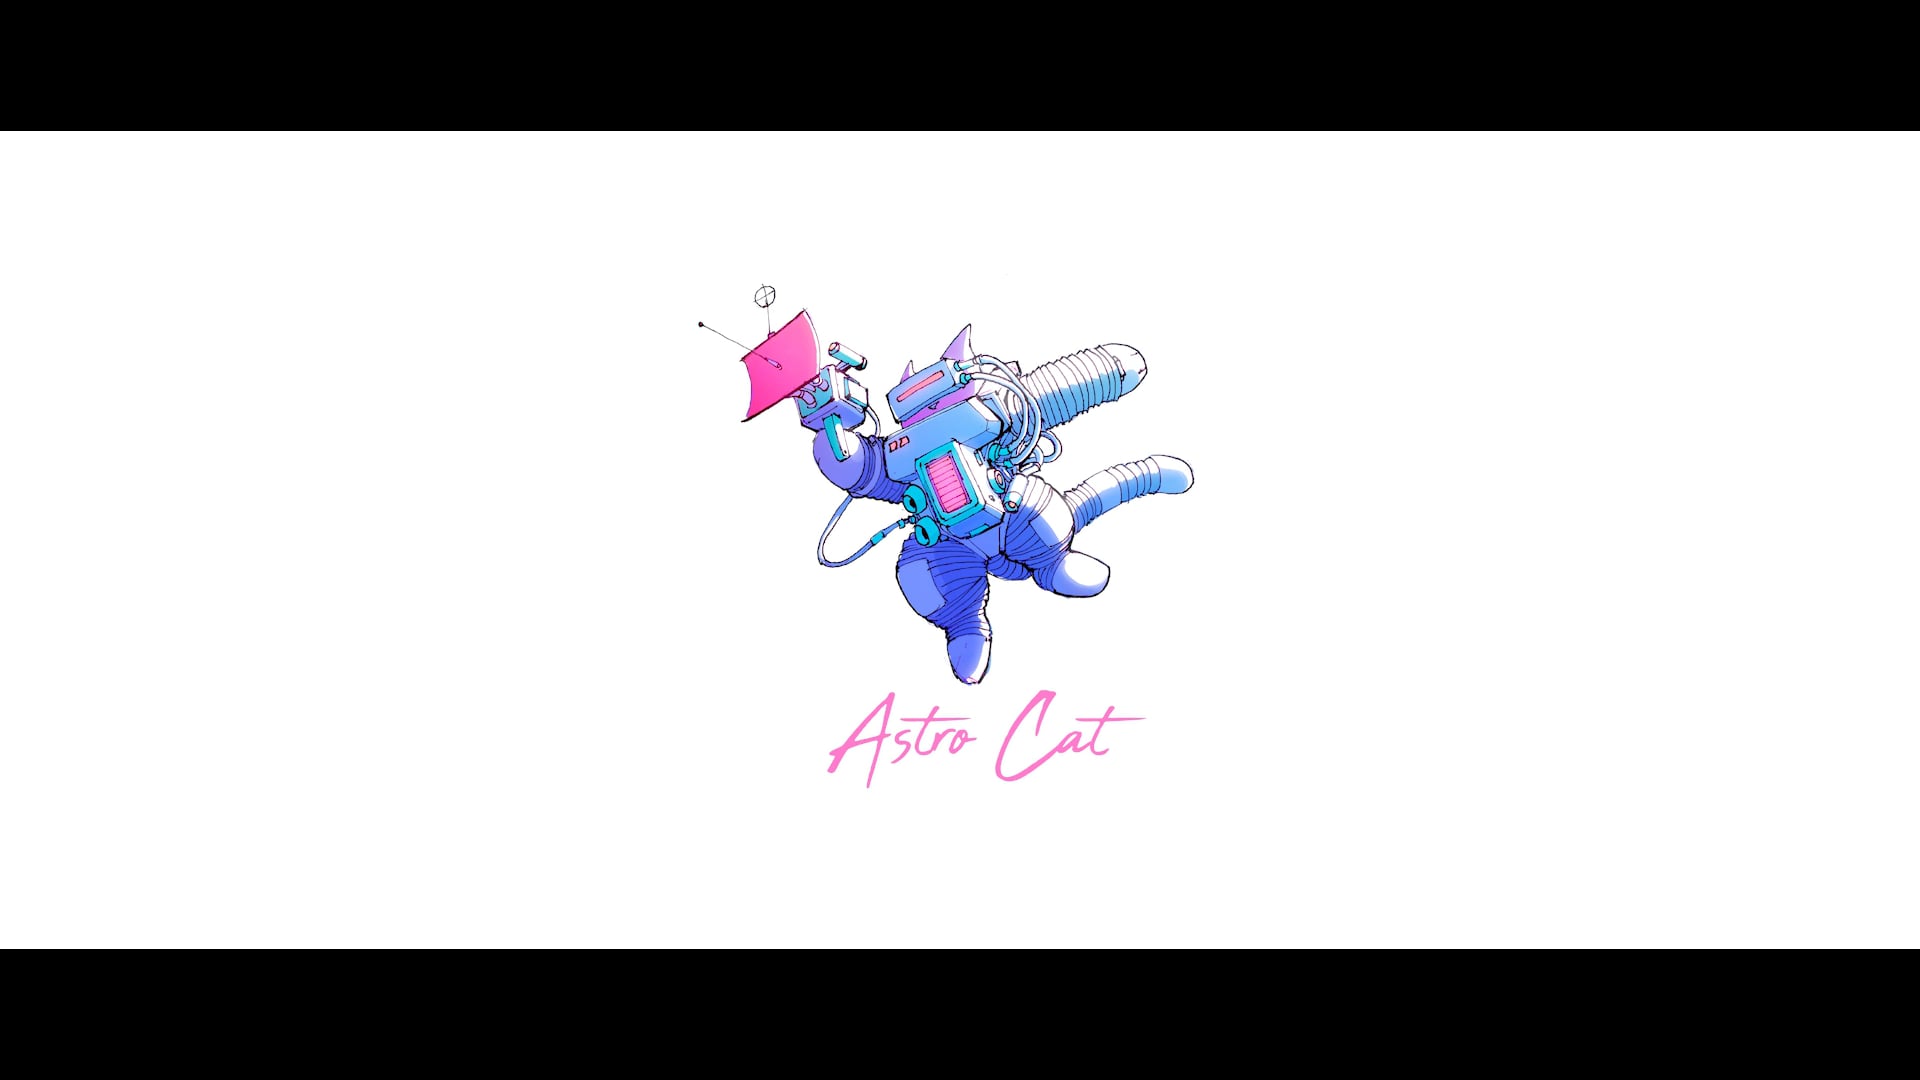 Promotional video thumbnail 1 for Astro Cat Videography